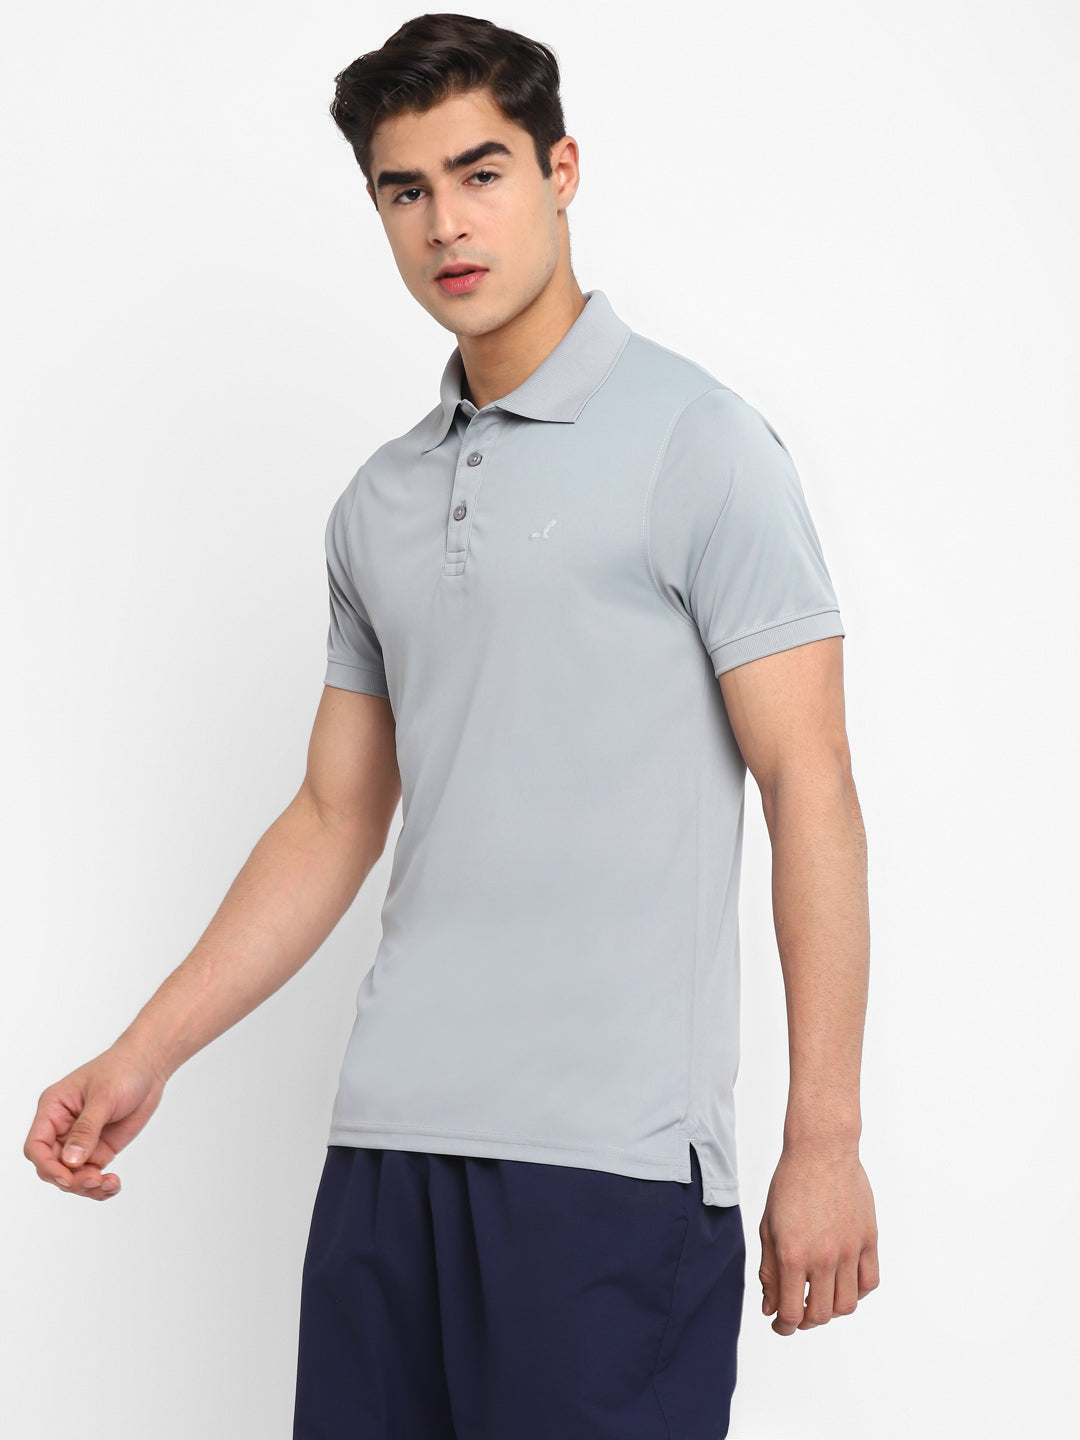 Kooltex Sports Polo T-Shirts For Men with Reflective Details - Light Grey